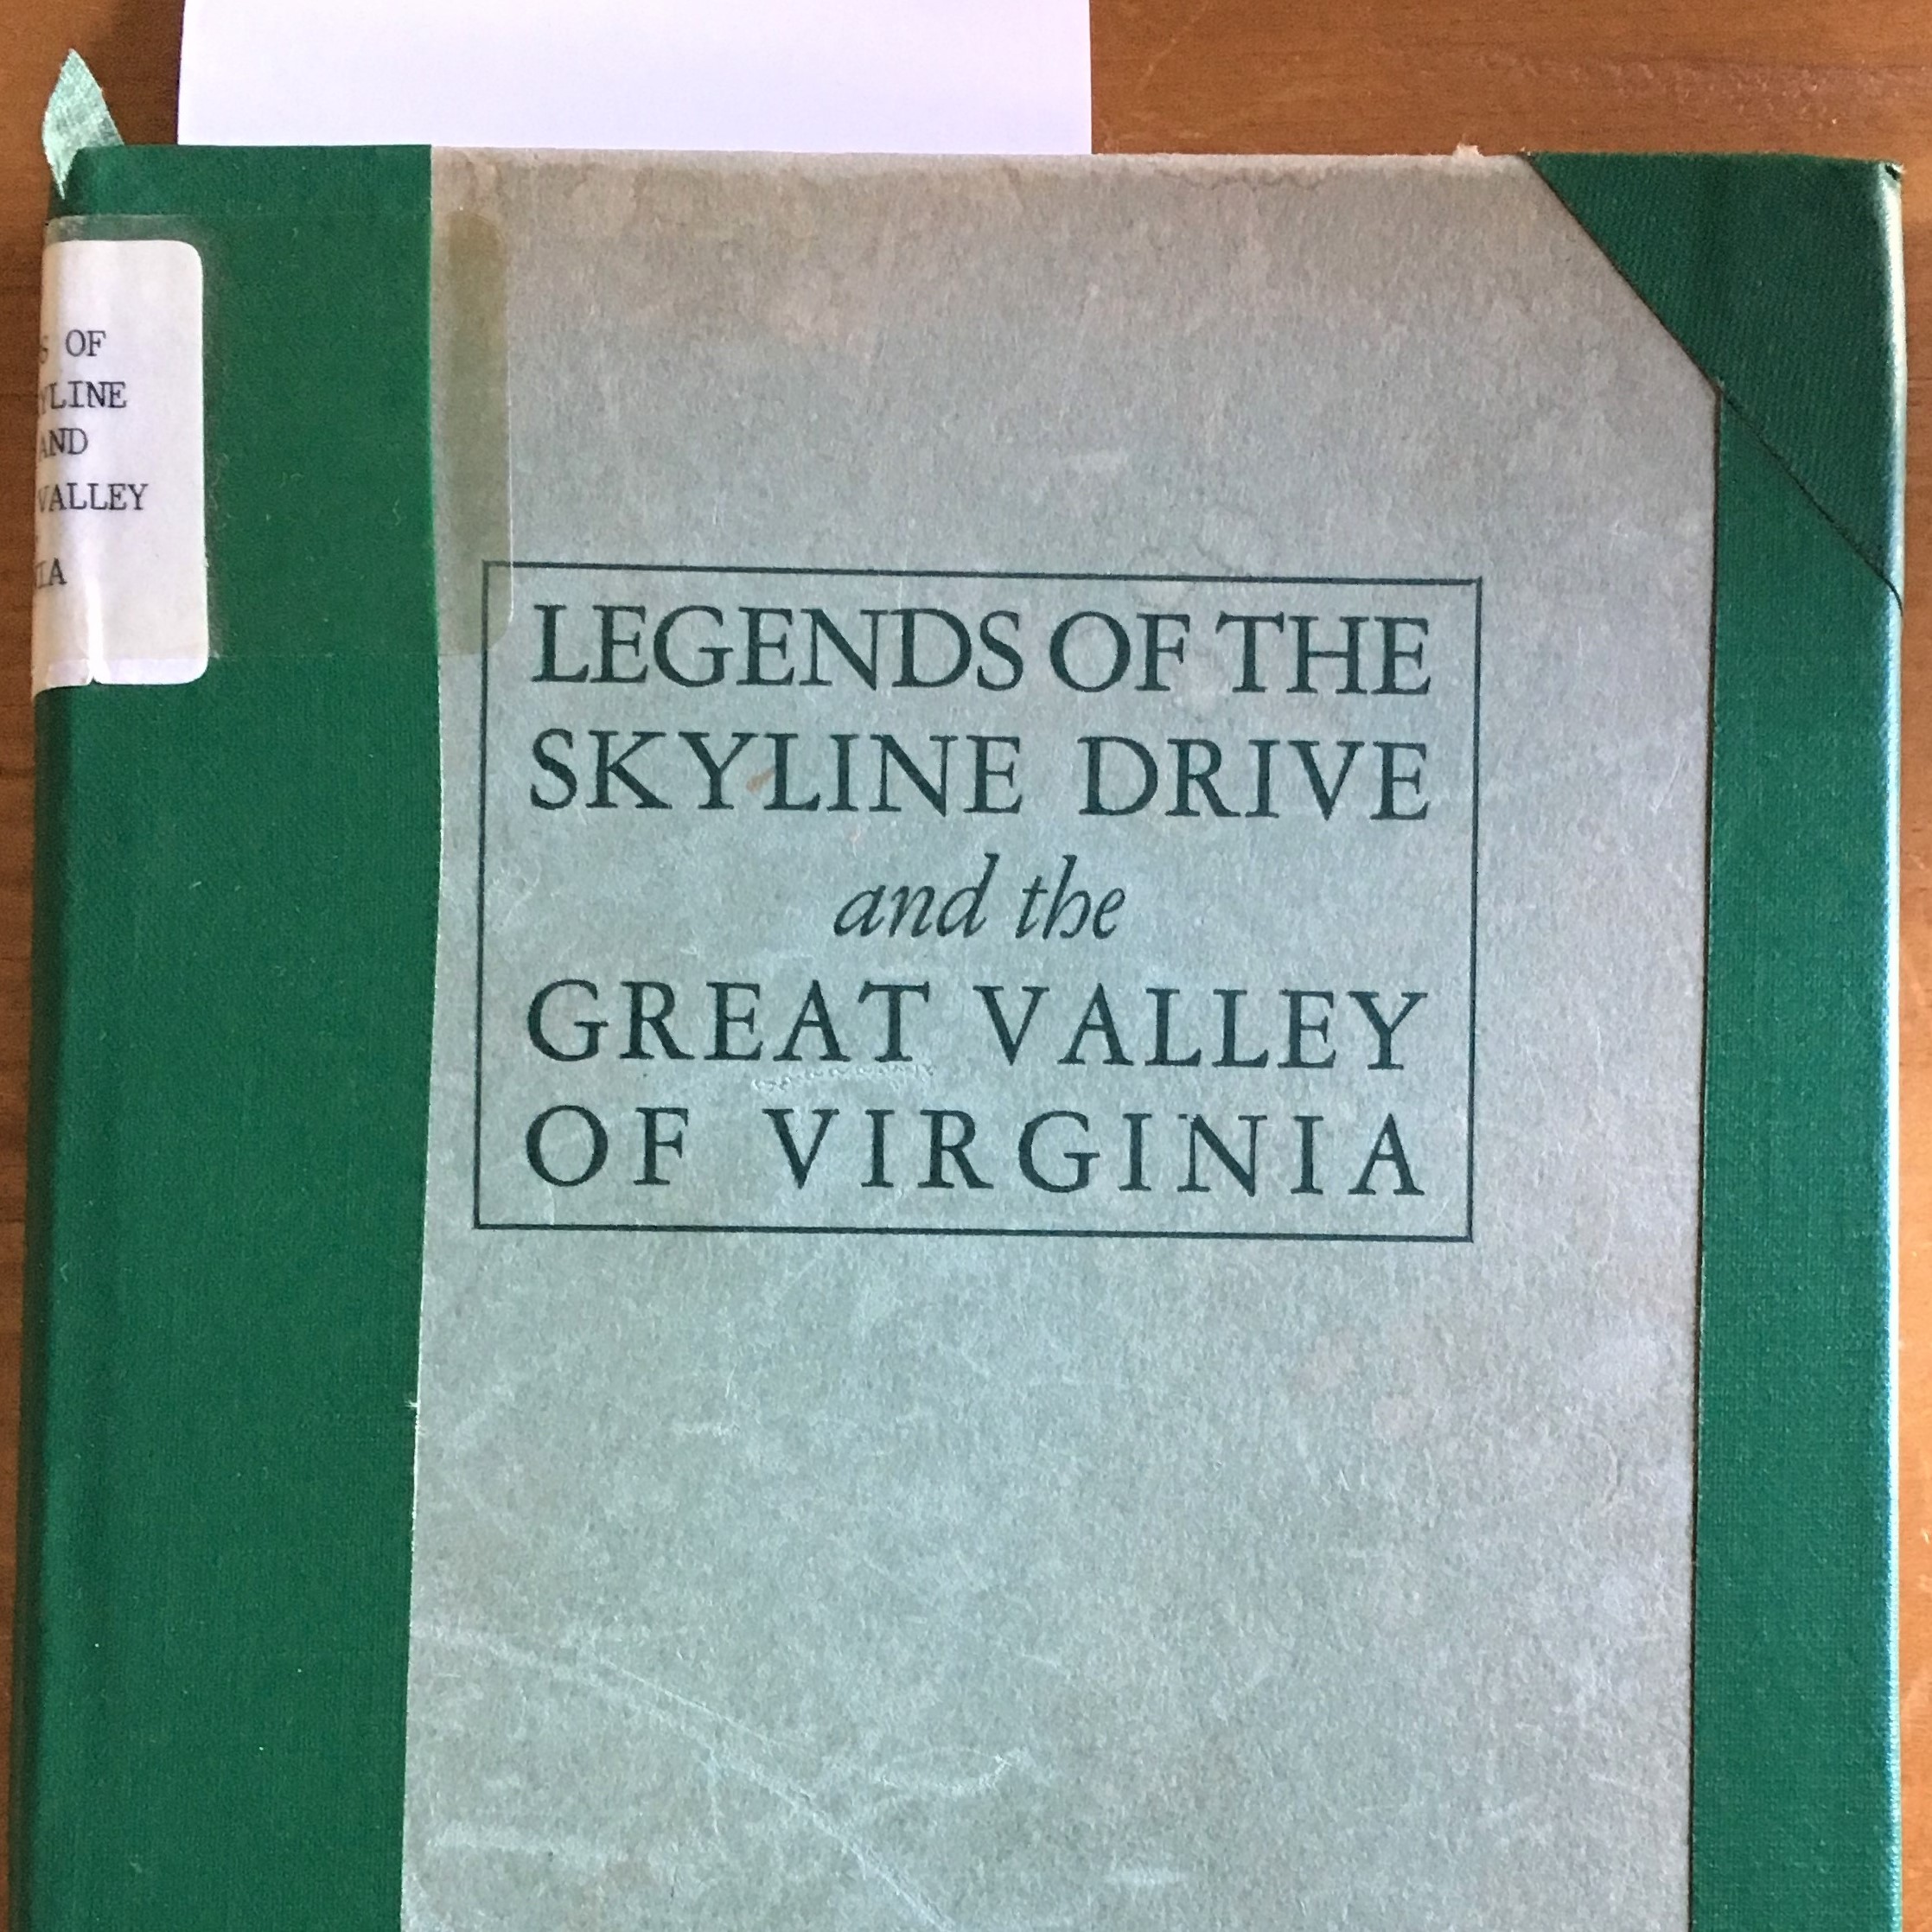 Small 1935 book titled: Legends of the Skyline Drive